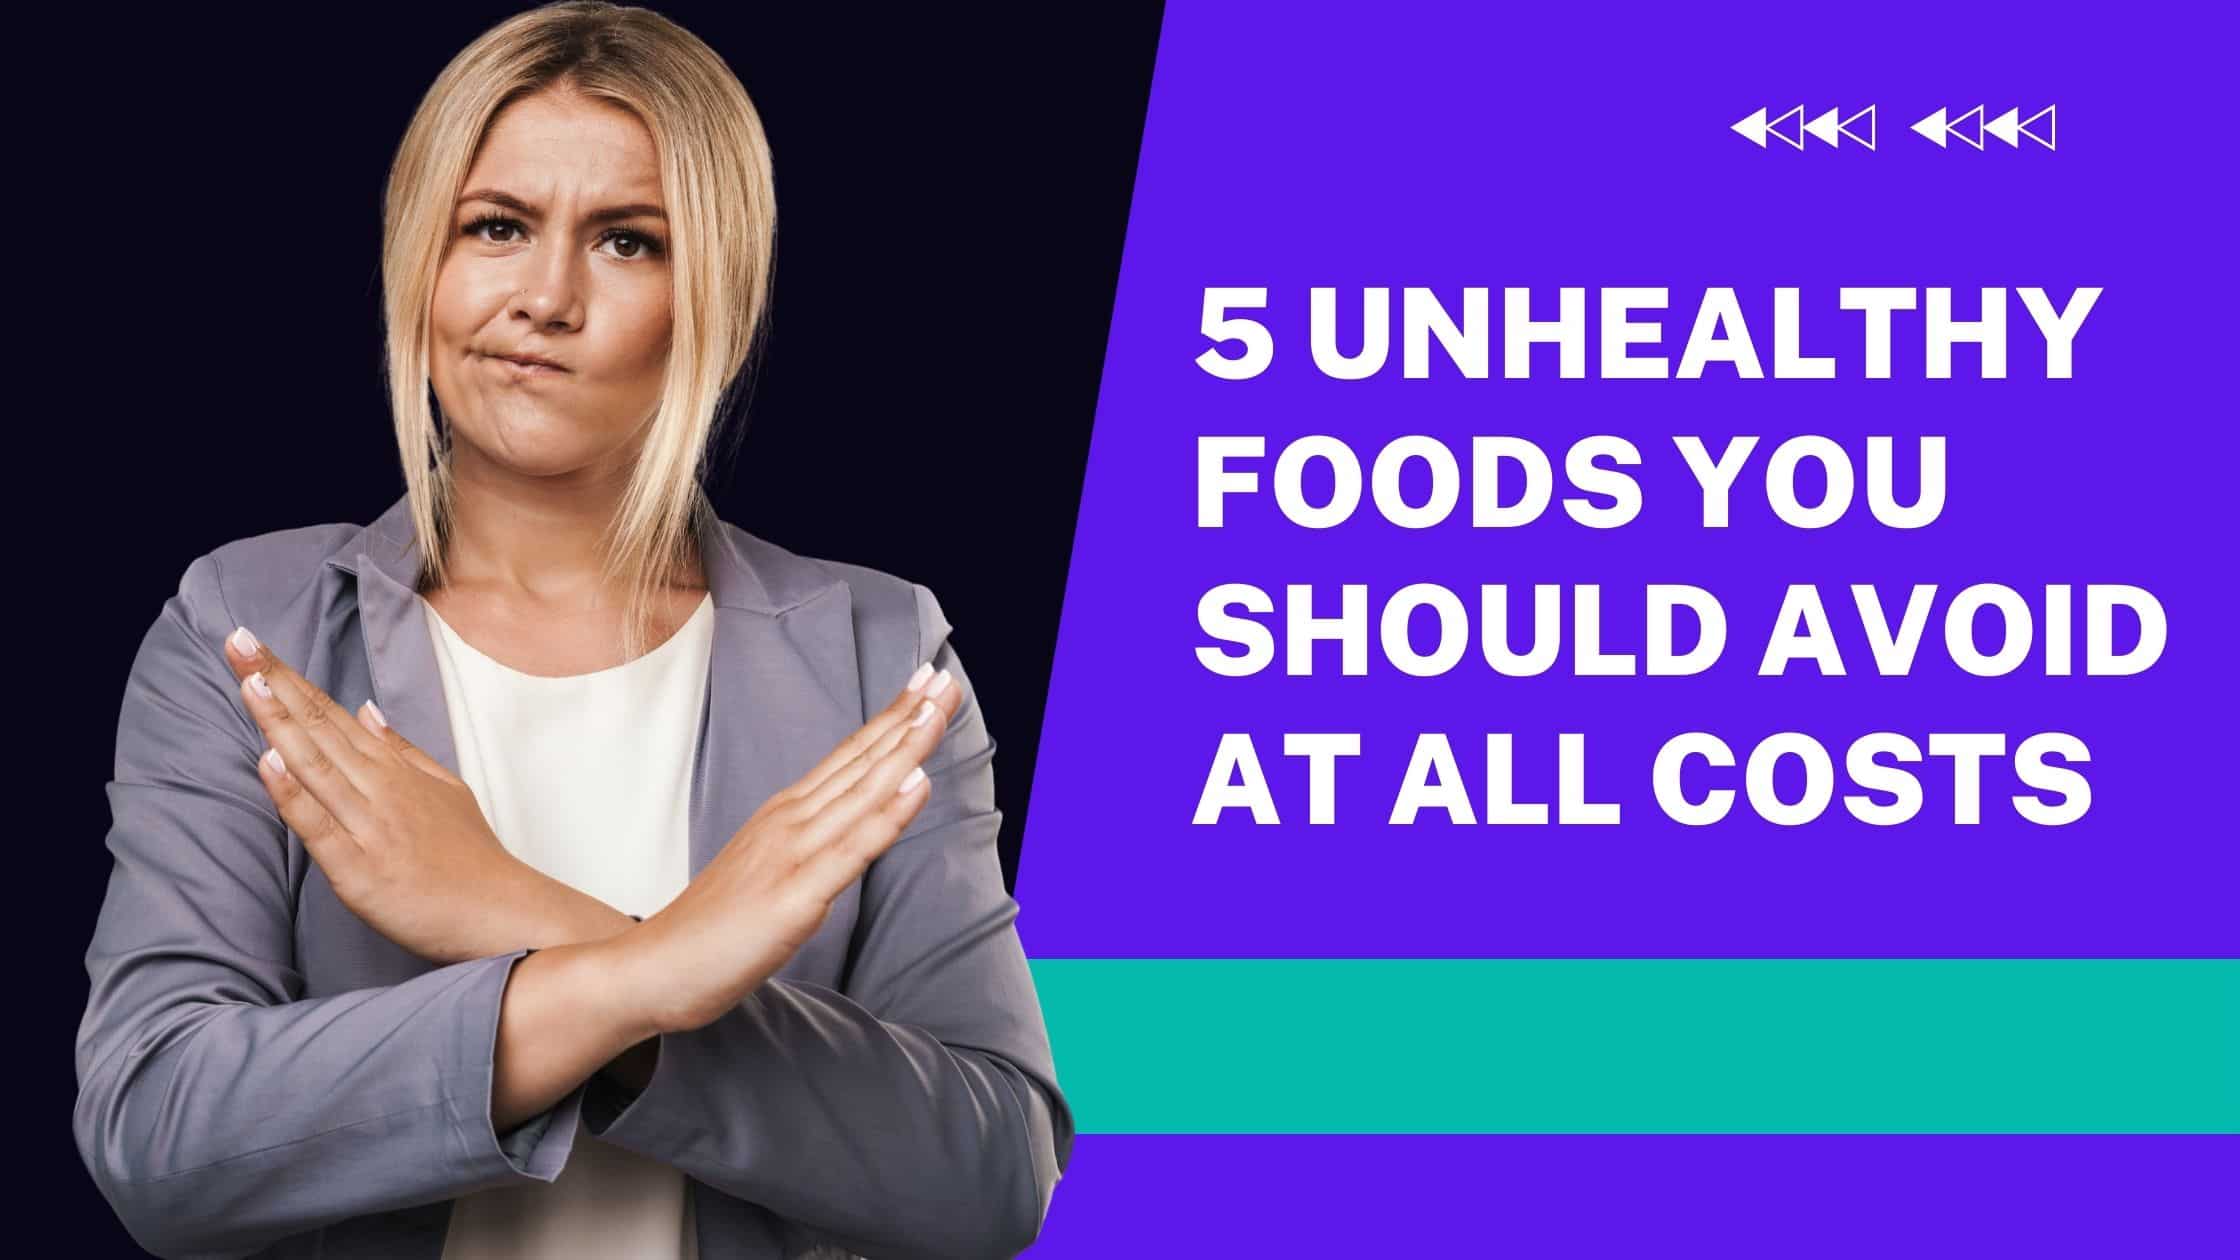 5 seemingly unhealthy foods that are actually good for you